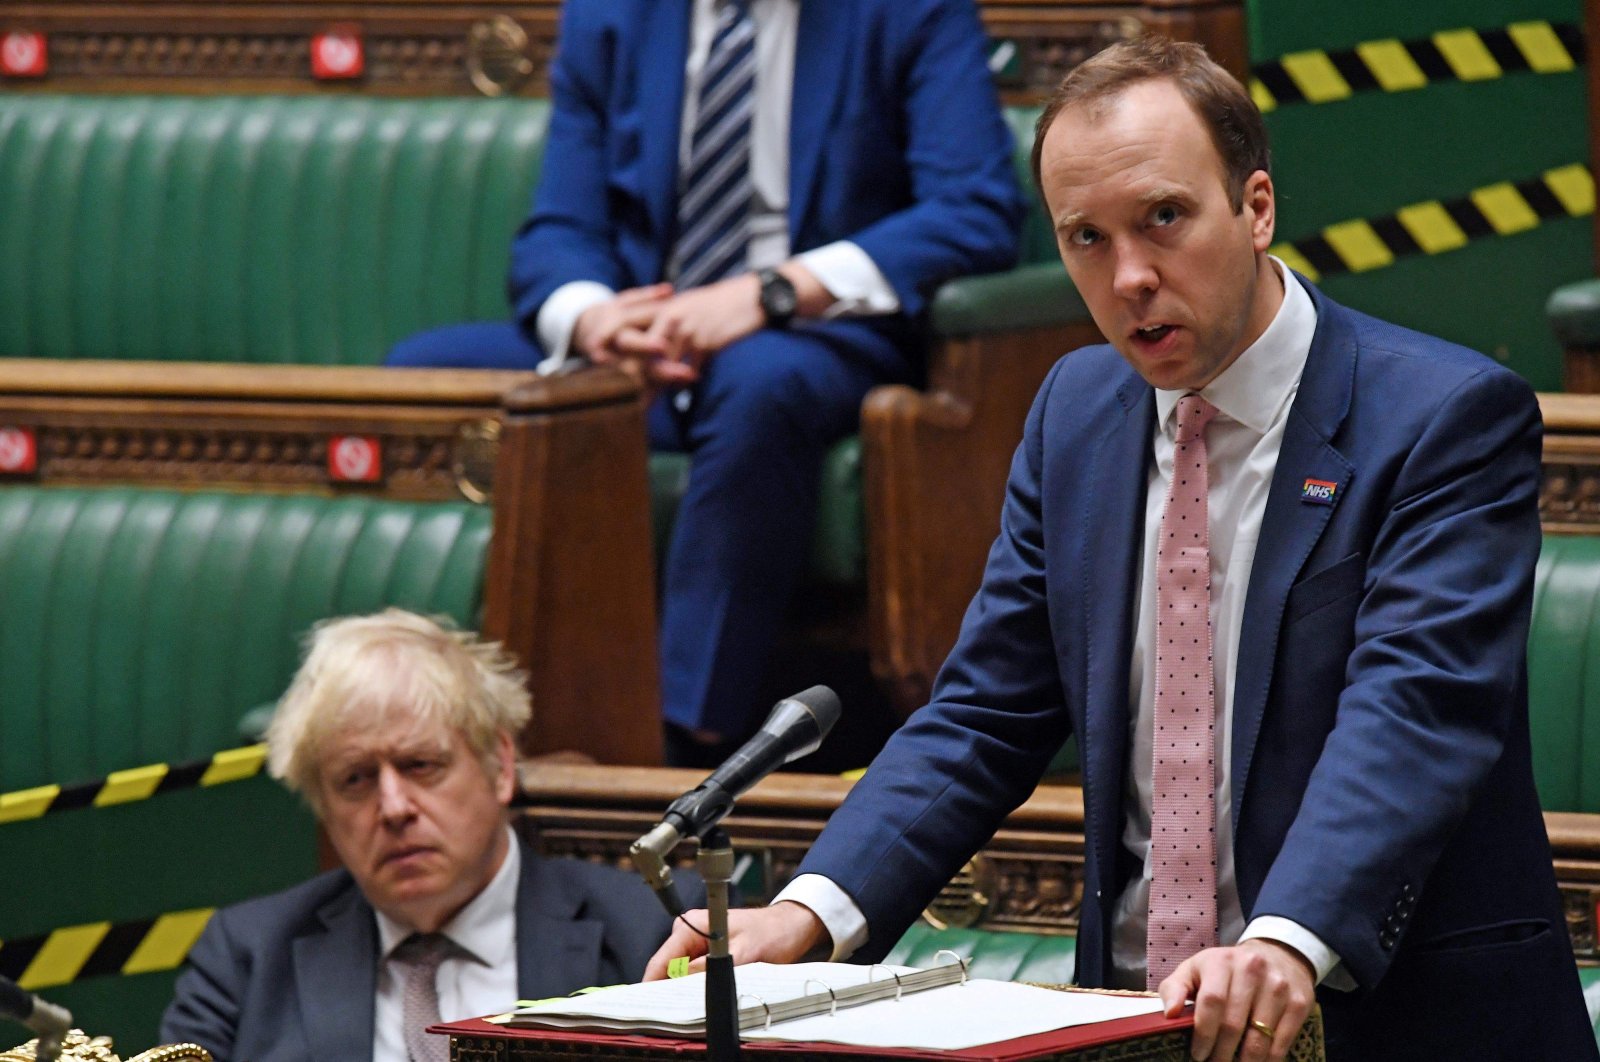 Britain's Prime Minister Boris Johnson (L) listens as Britain's Health Secretary Matt Hancock gives a COVID-19 update statement in the House of Commons in London, U.K., November 26, 2020. (AFP Photo)